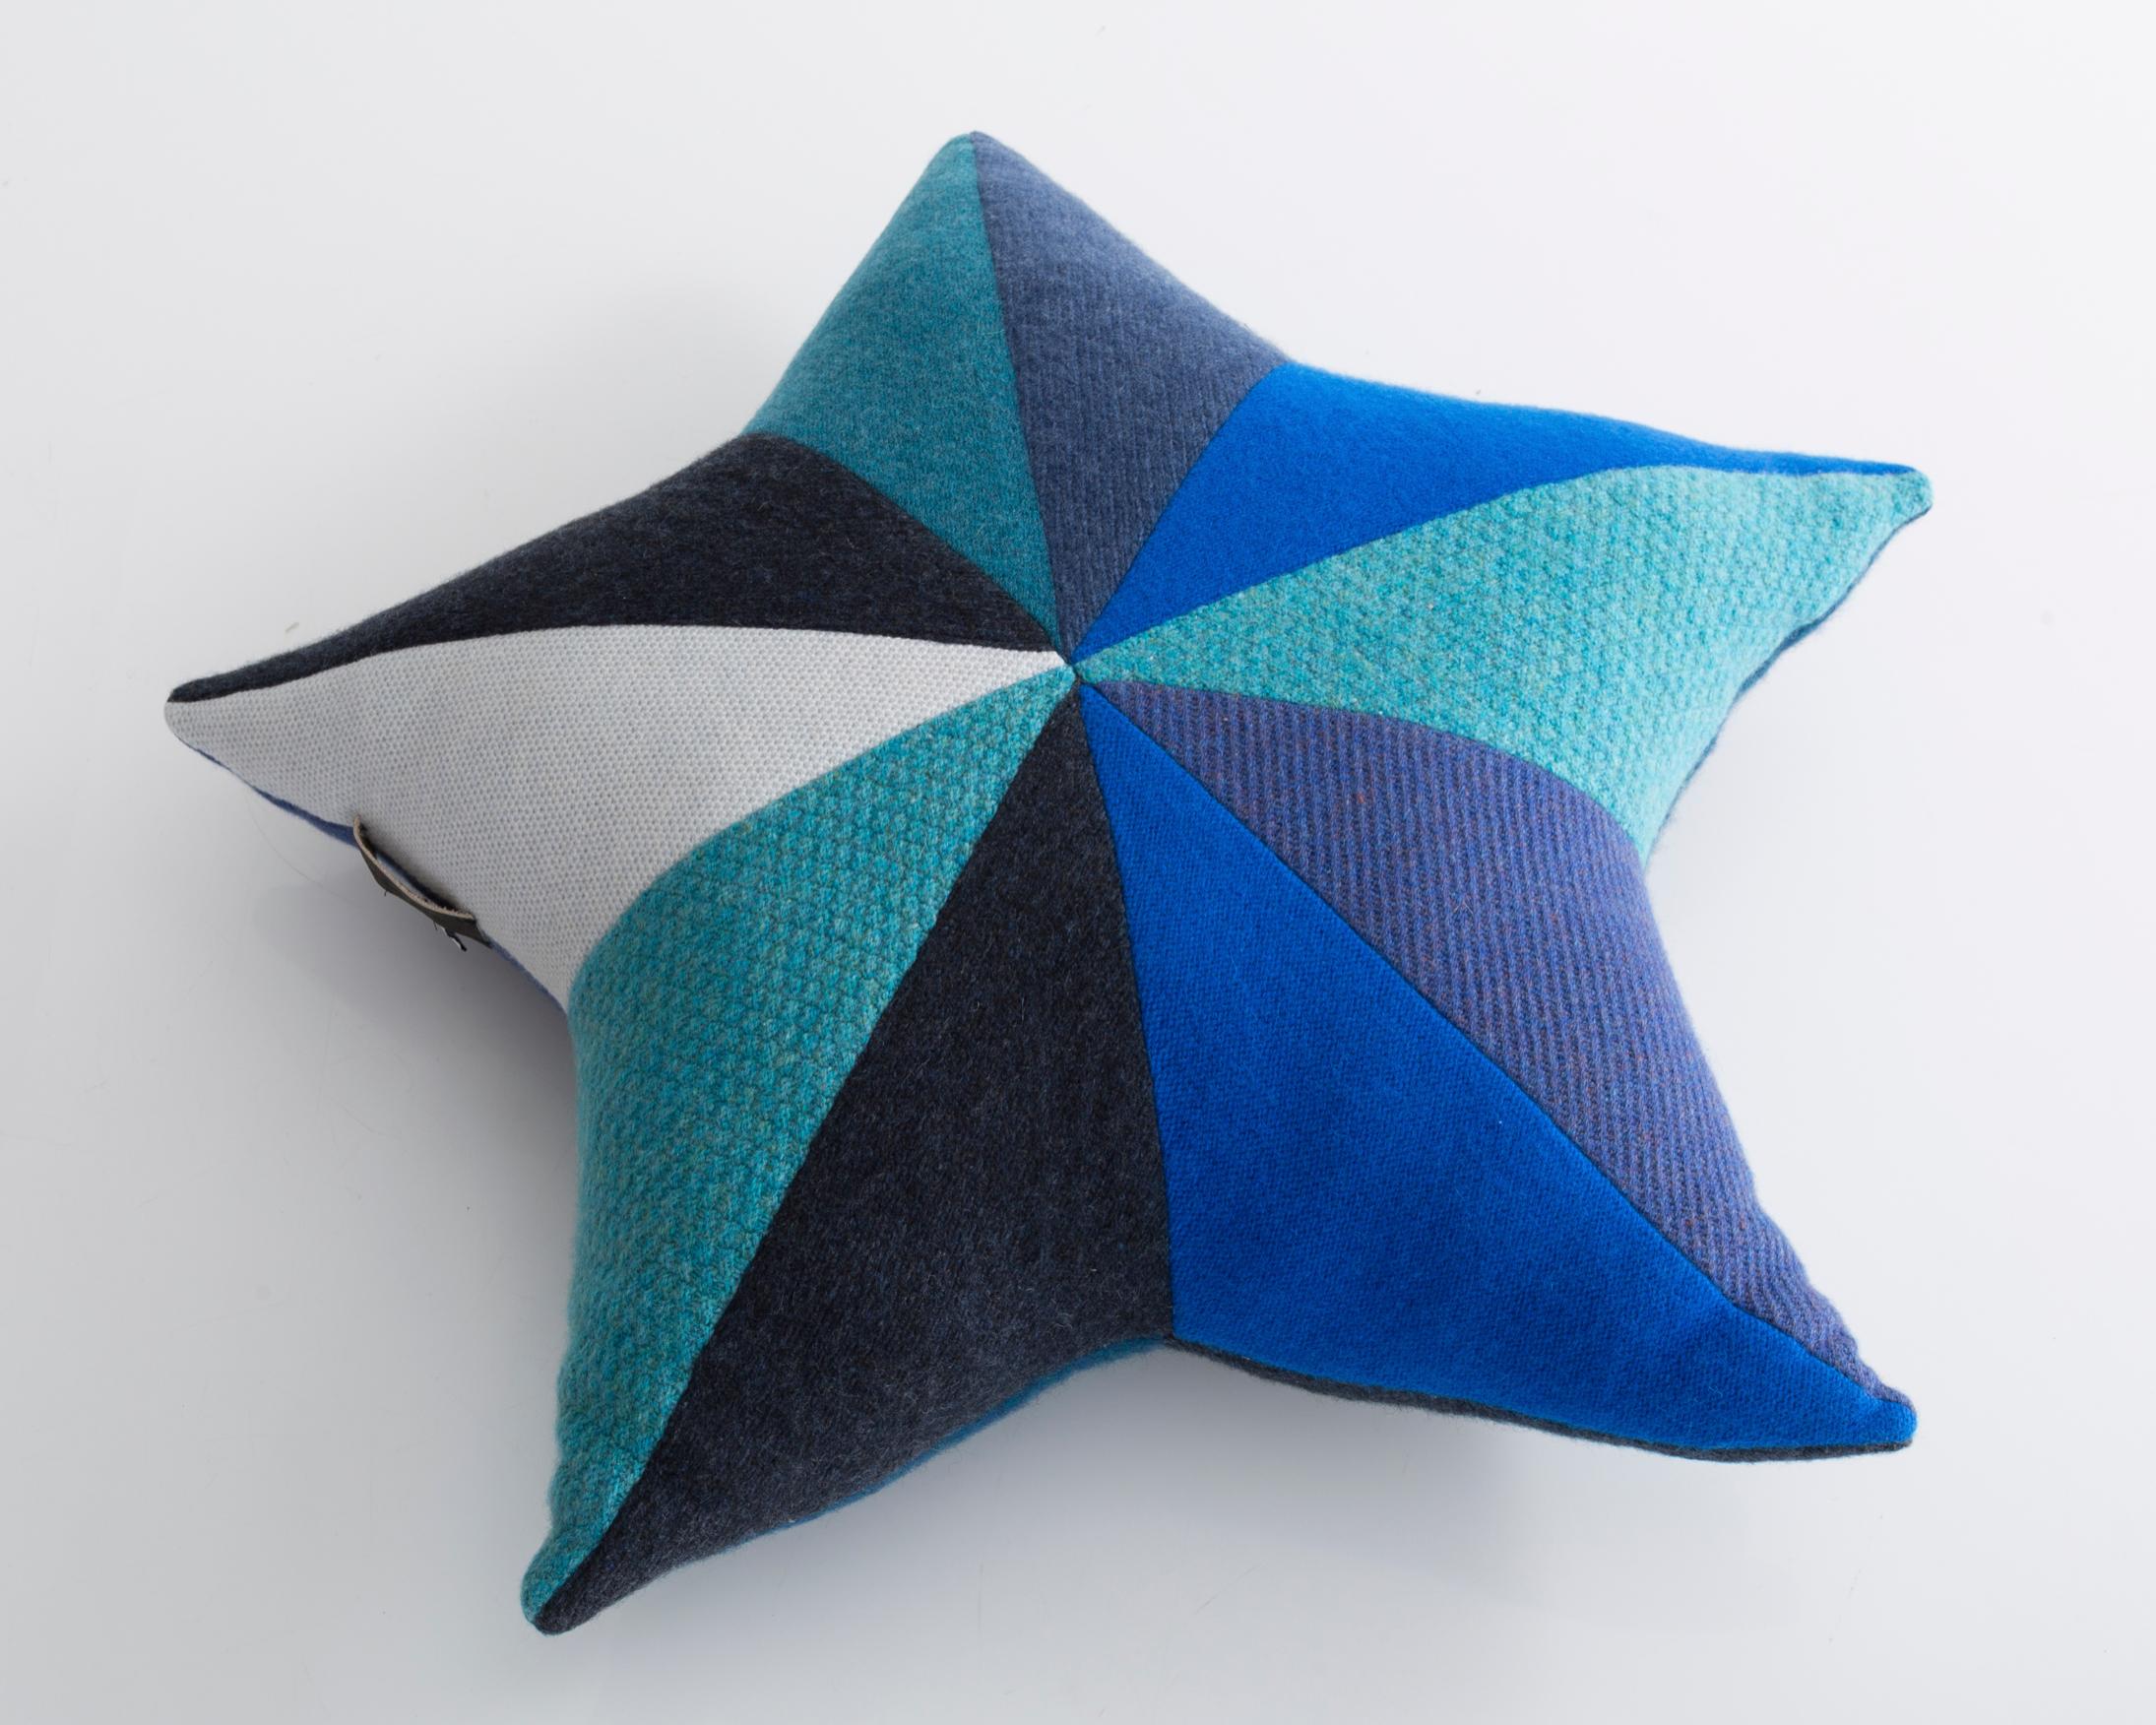 Unique star-shaped patchwork pillow in blue cashmere. Designed and made by Greg Chait, USA, 2017.